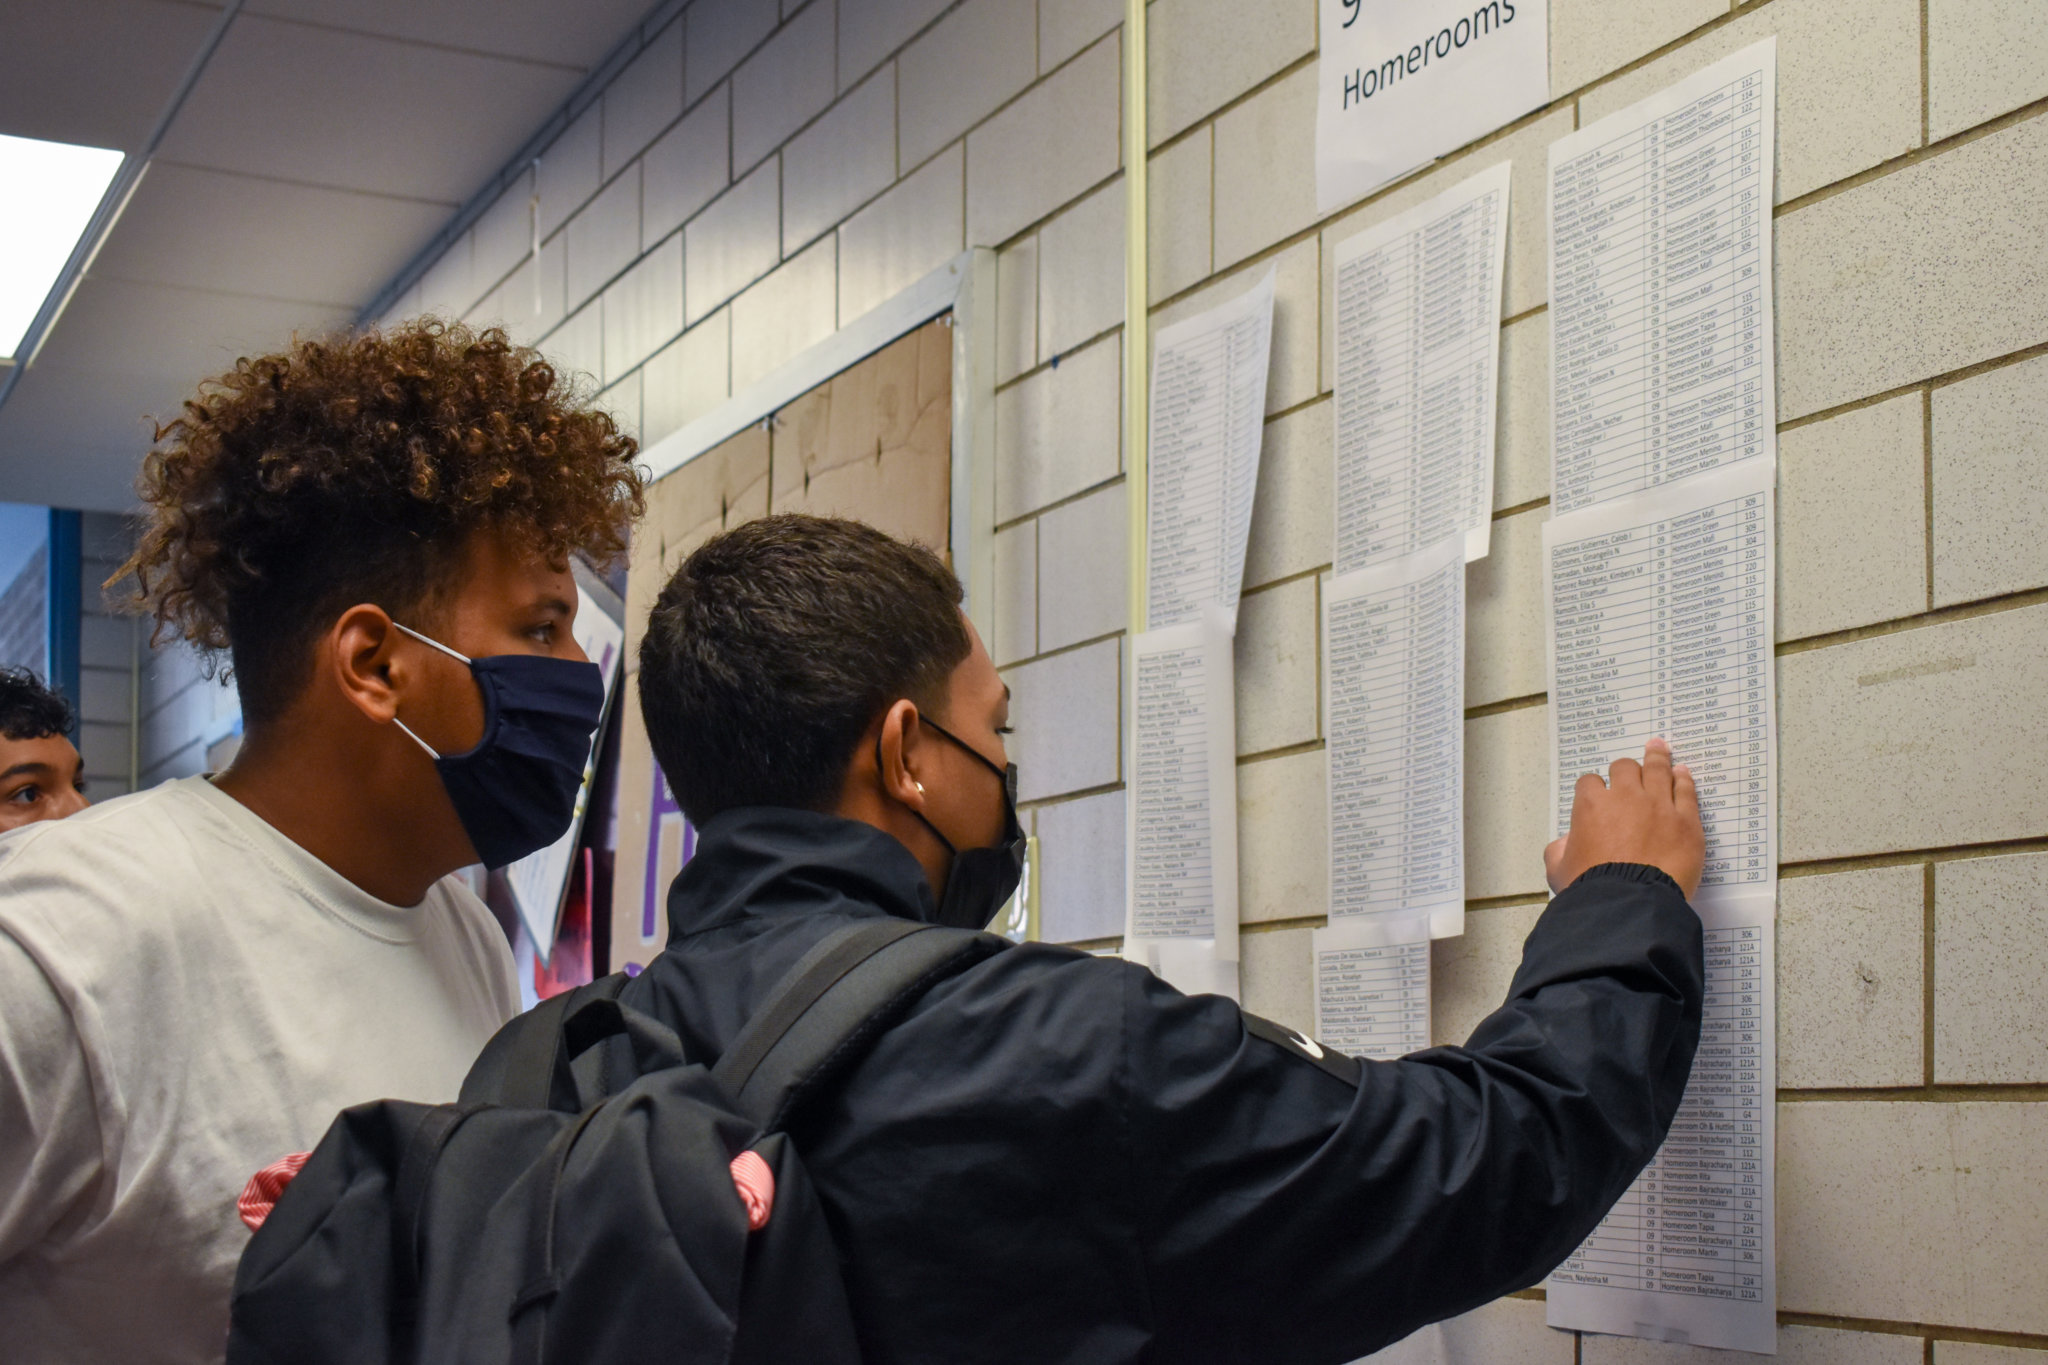 2 students looking at sheets of paper taped on the wall in the hallway